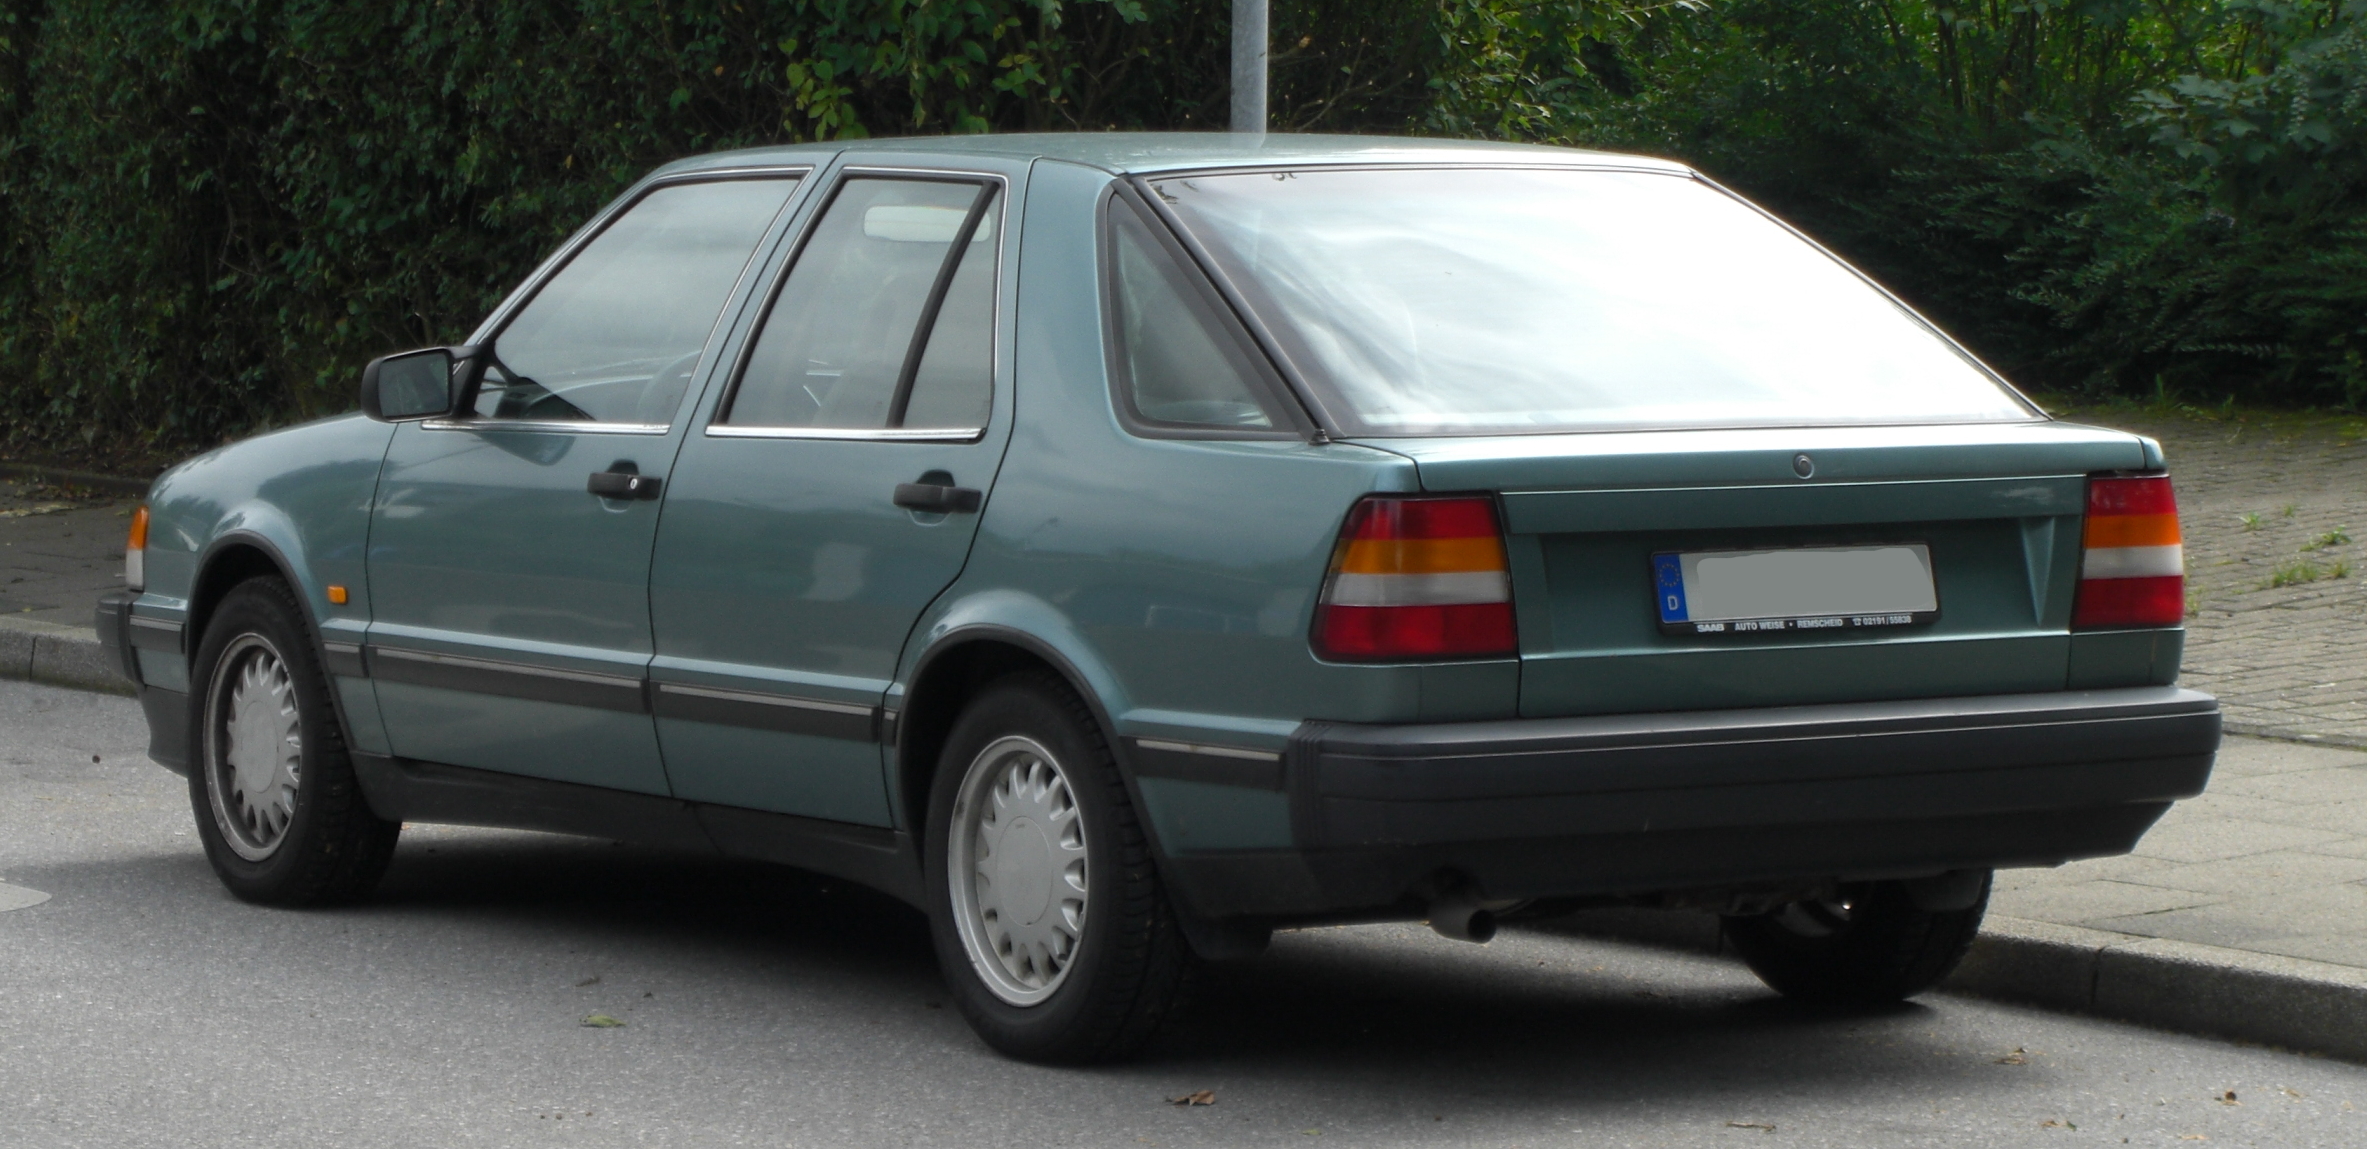 SAAB 9000 CC: Photo gallery, complete information about model ...